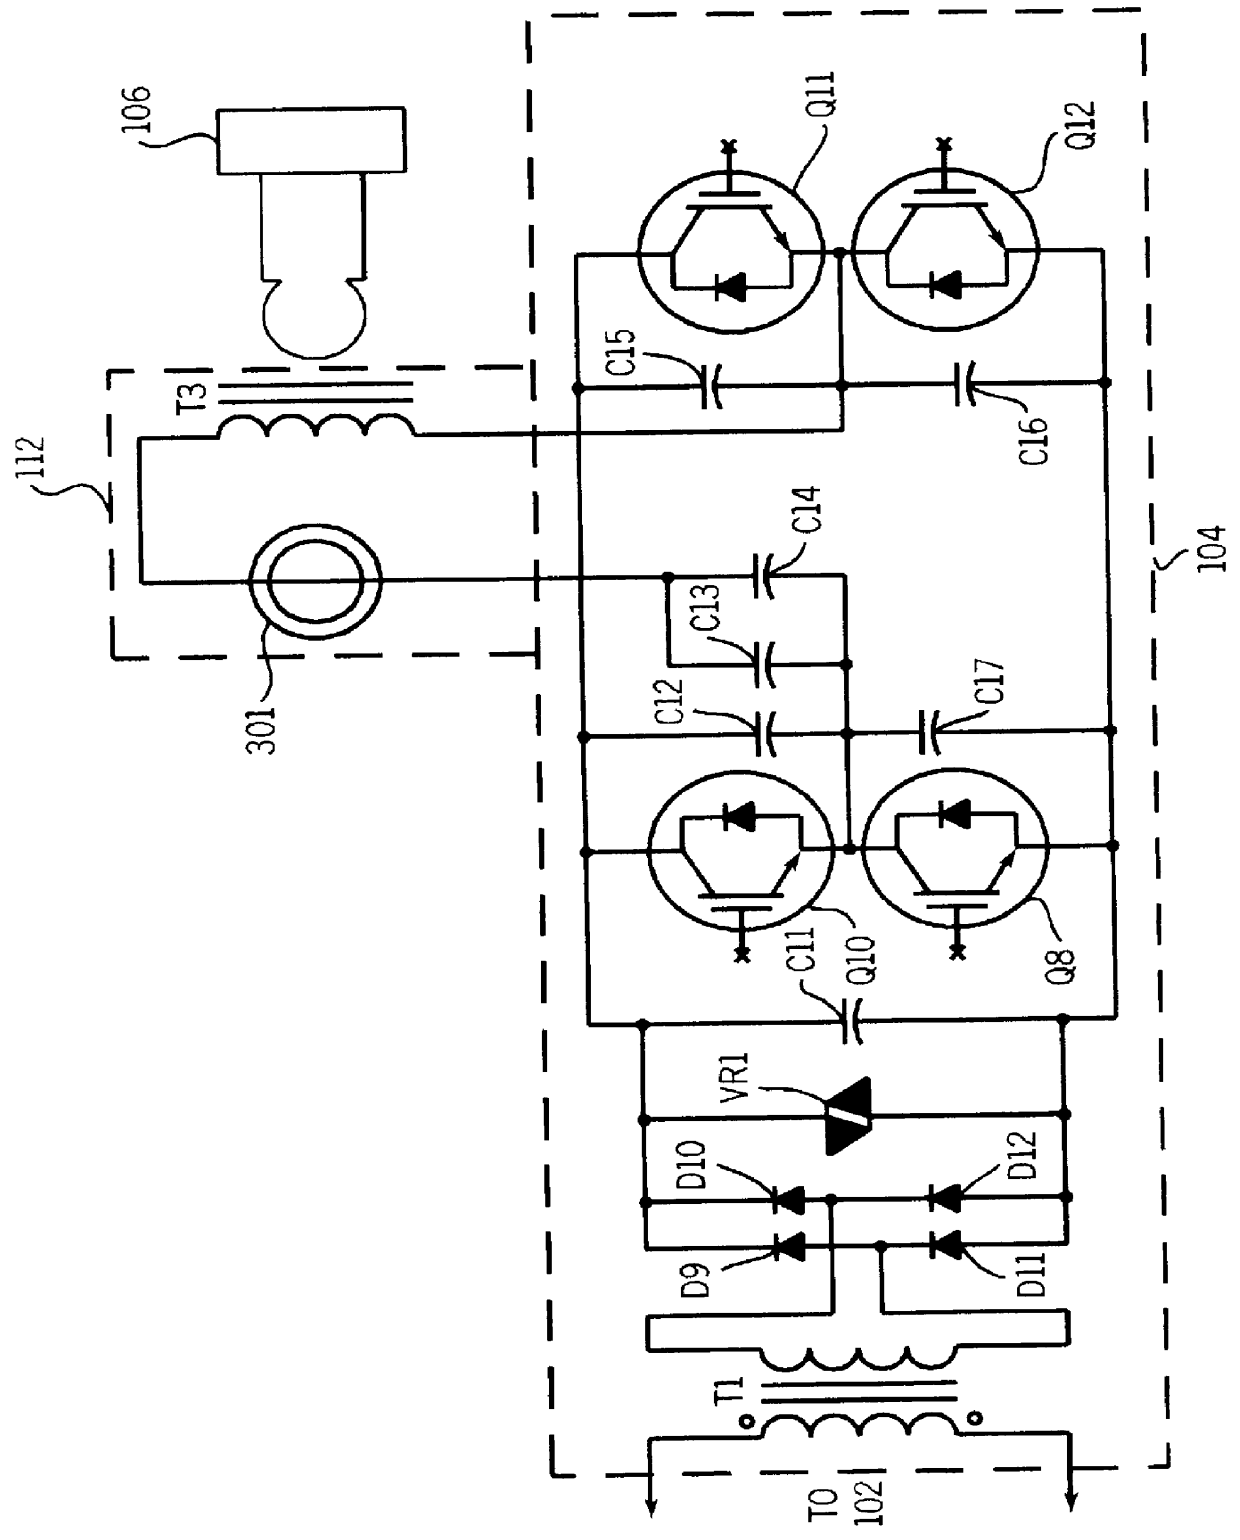 Multiple head inductive heating system